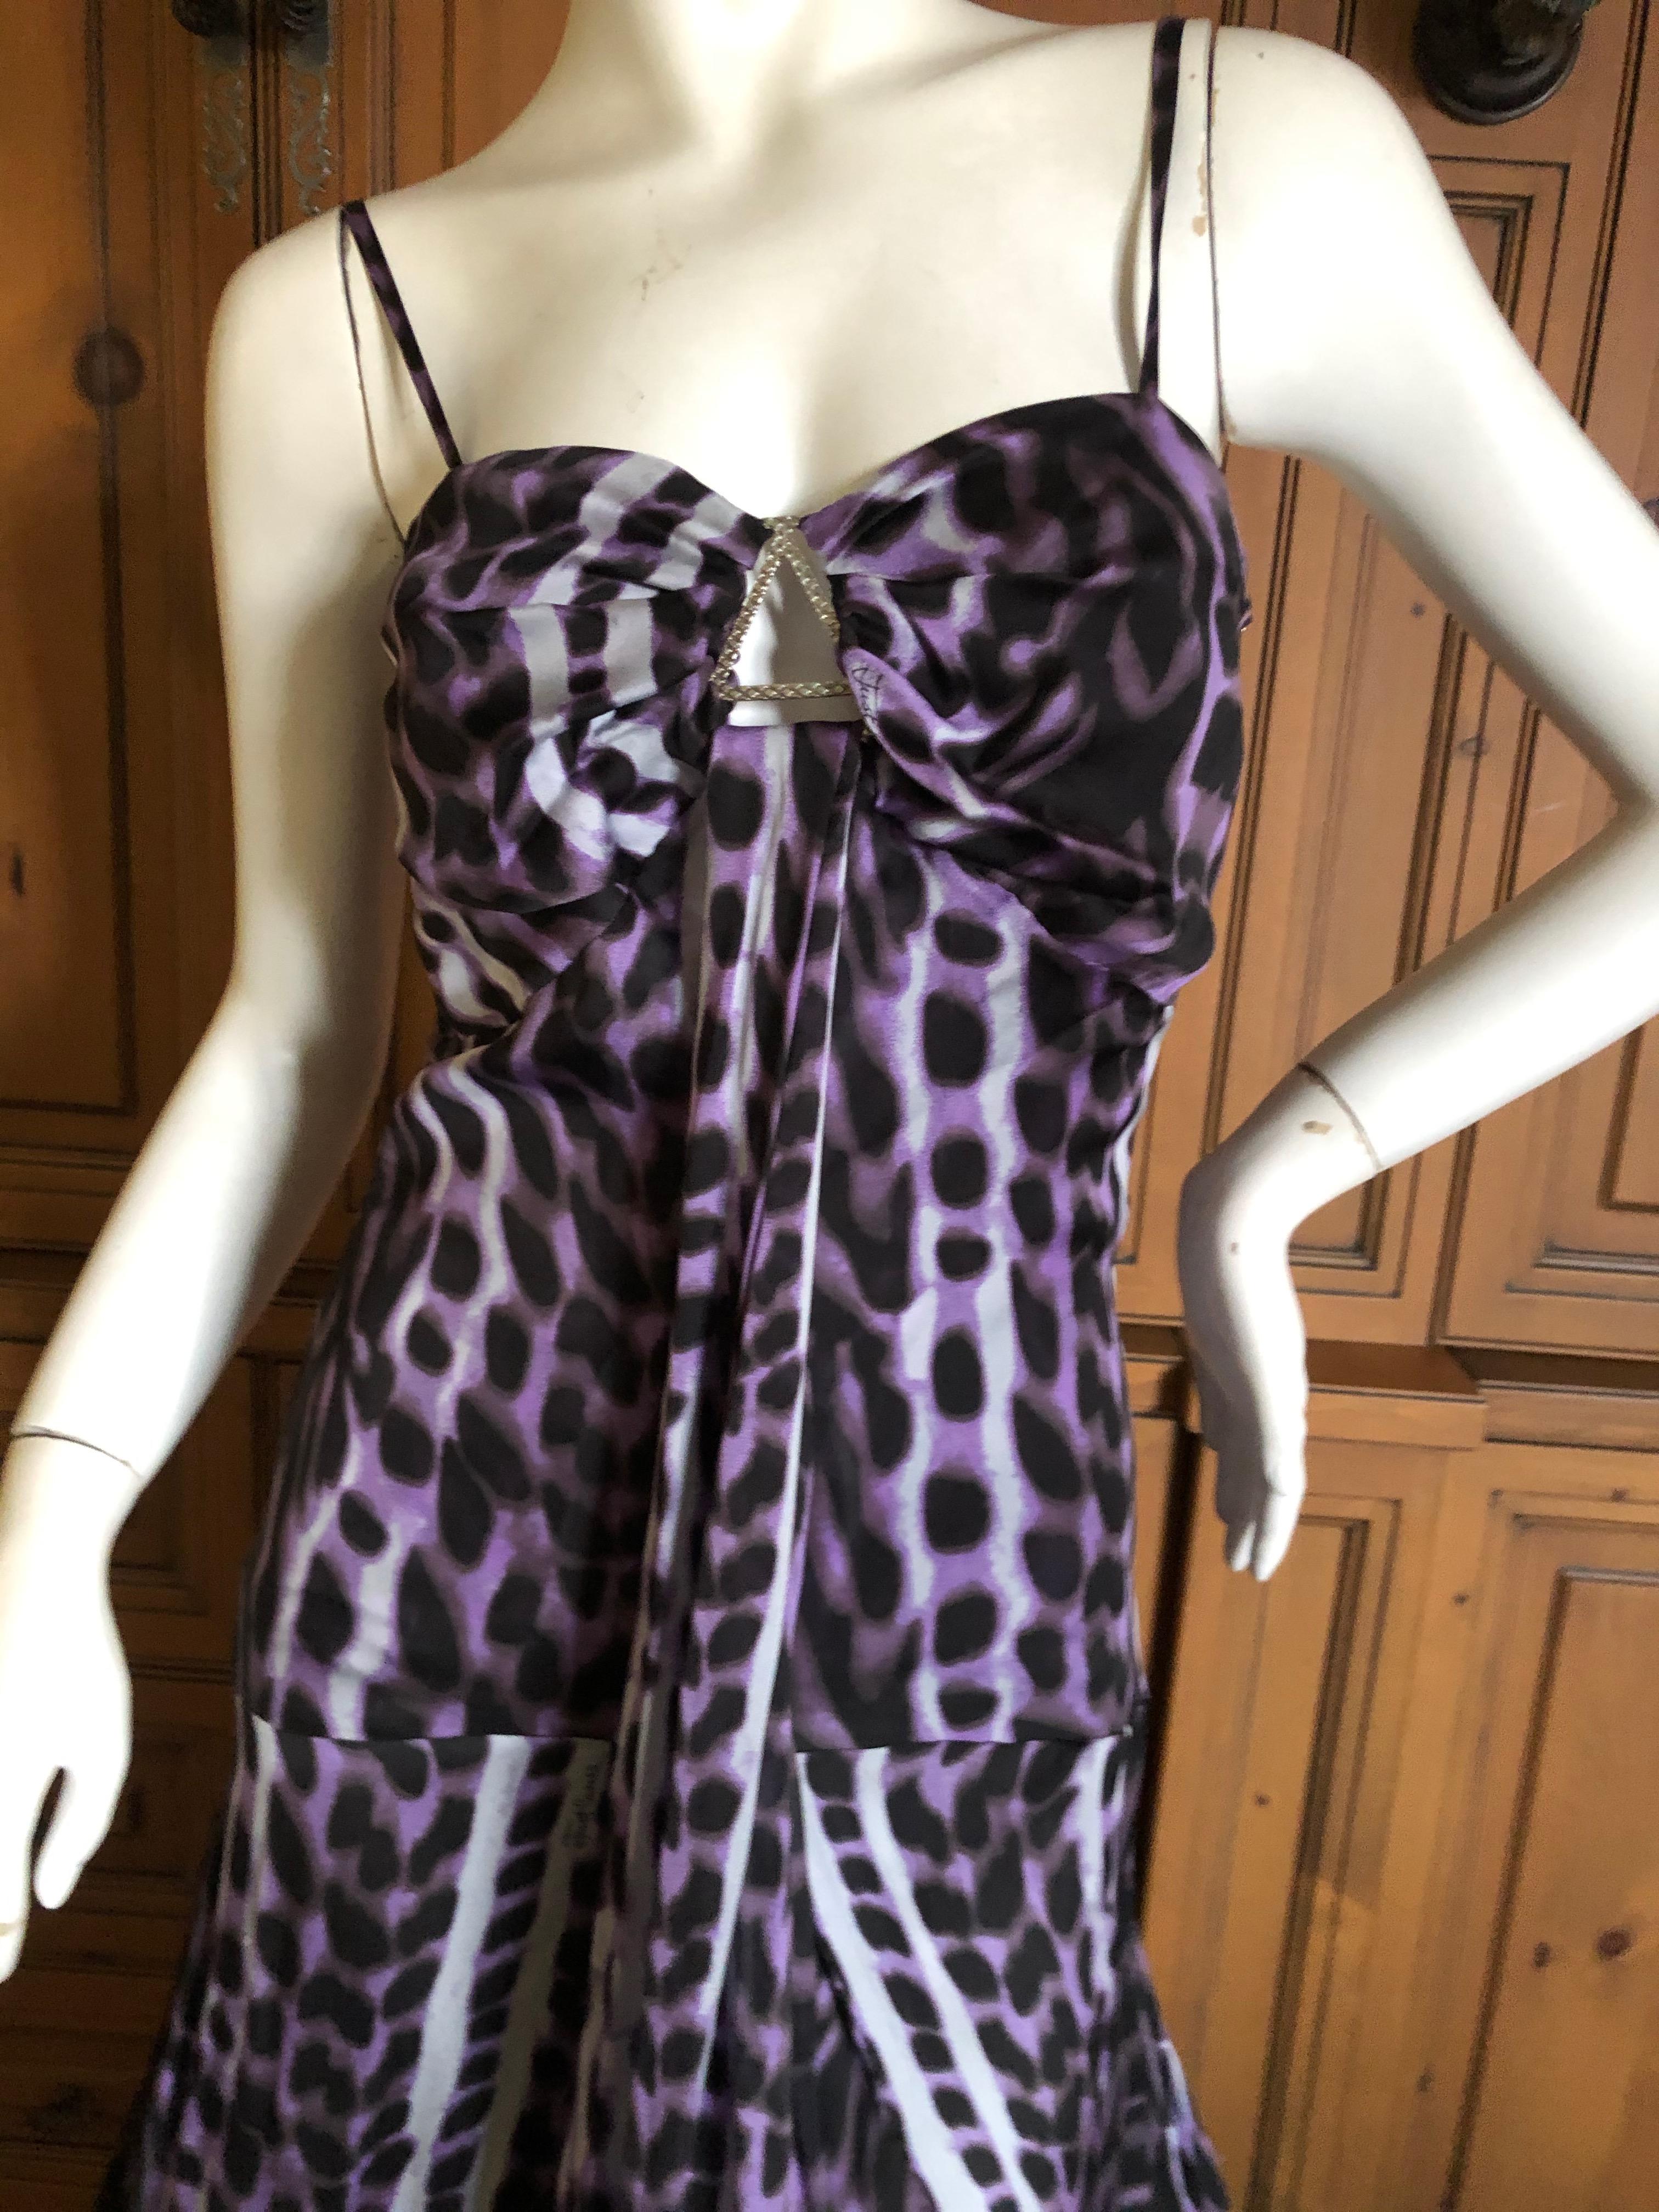  Roberto Cavalli Just Cavalli Leopard Print Silk Evening Gown with Long Weighted Hem .
Keyhole bust details, with a small matching scarf included.
This is so pretty, there is a heavy banded hem that makes this flow in every direction.
Size 40
Bust